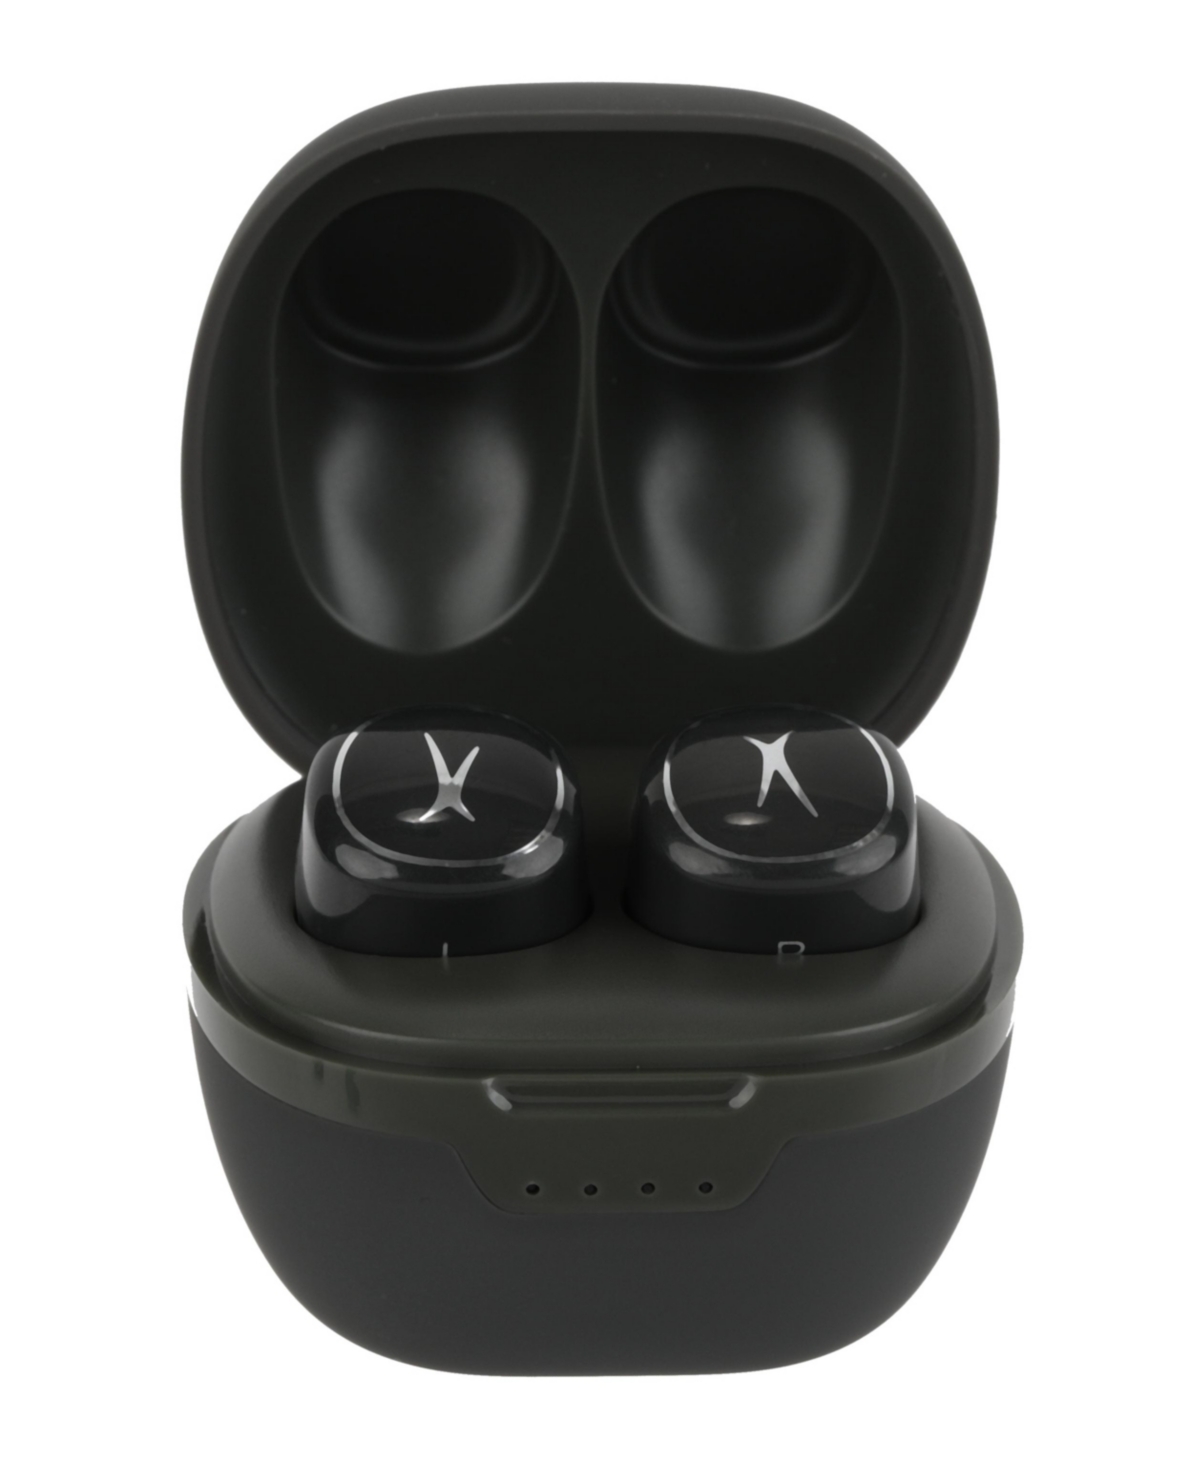 Altec Lansing Nanobud 2.0 True Wireless, Earbuds With Charging Case In Black